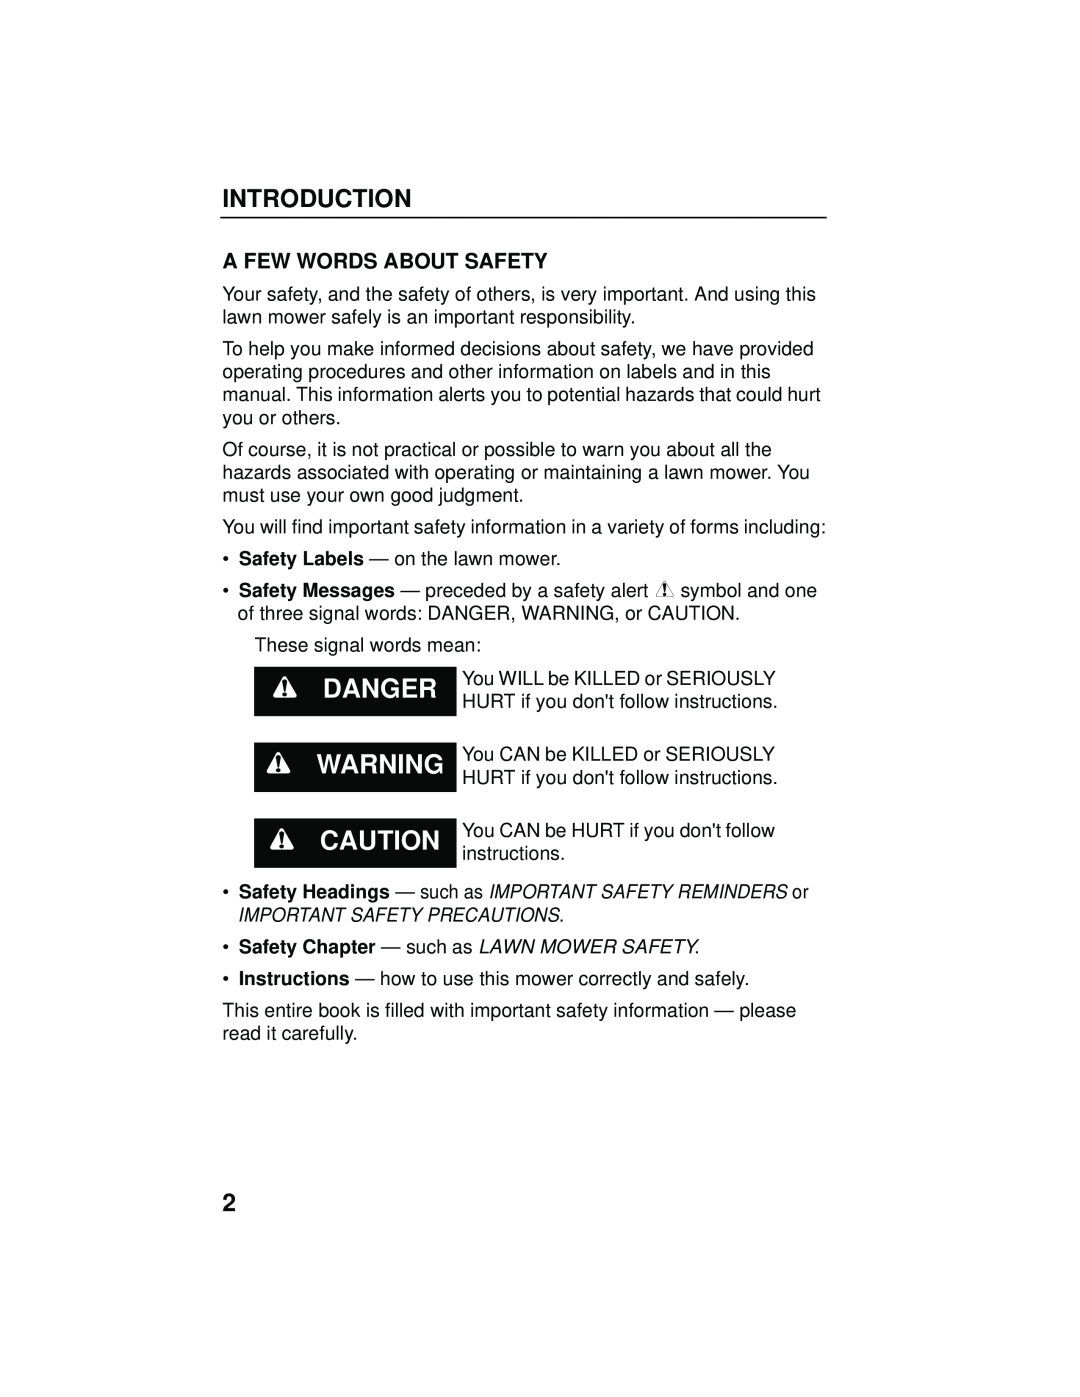 Honda Power Equipment HRB216TXA owner manual Introduction, A Few Words About Safety, Important Safety Precautions 